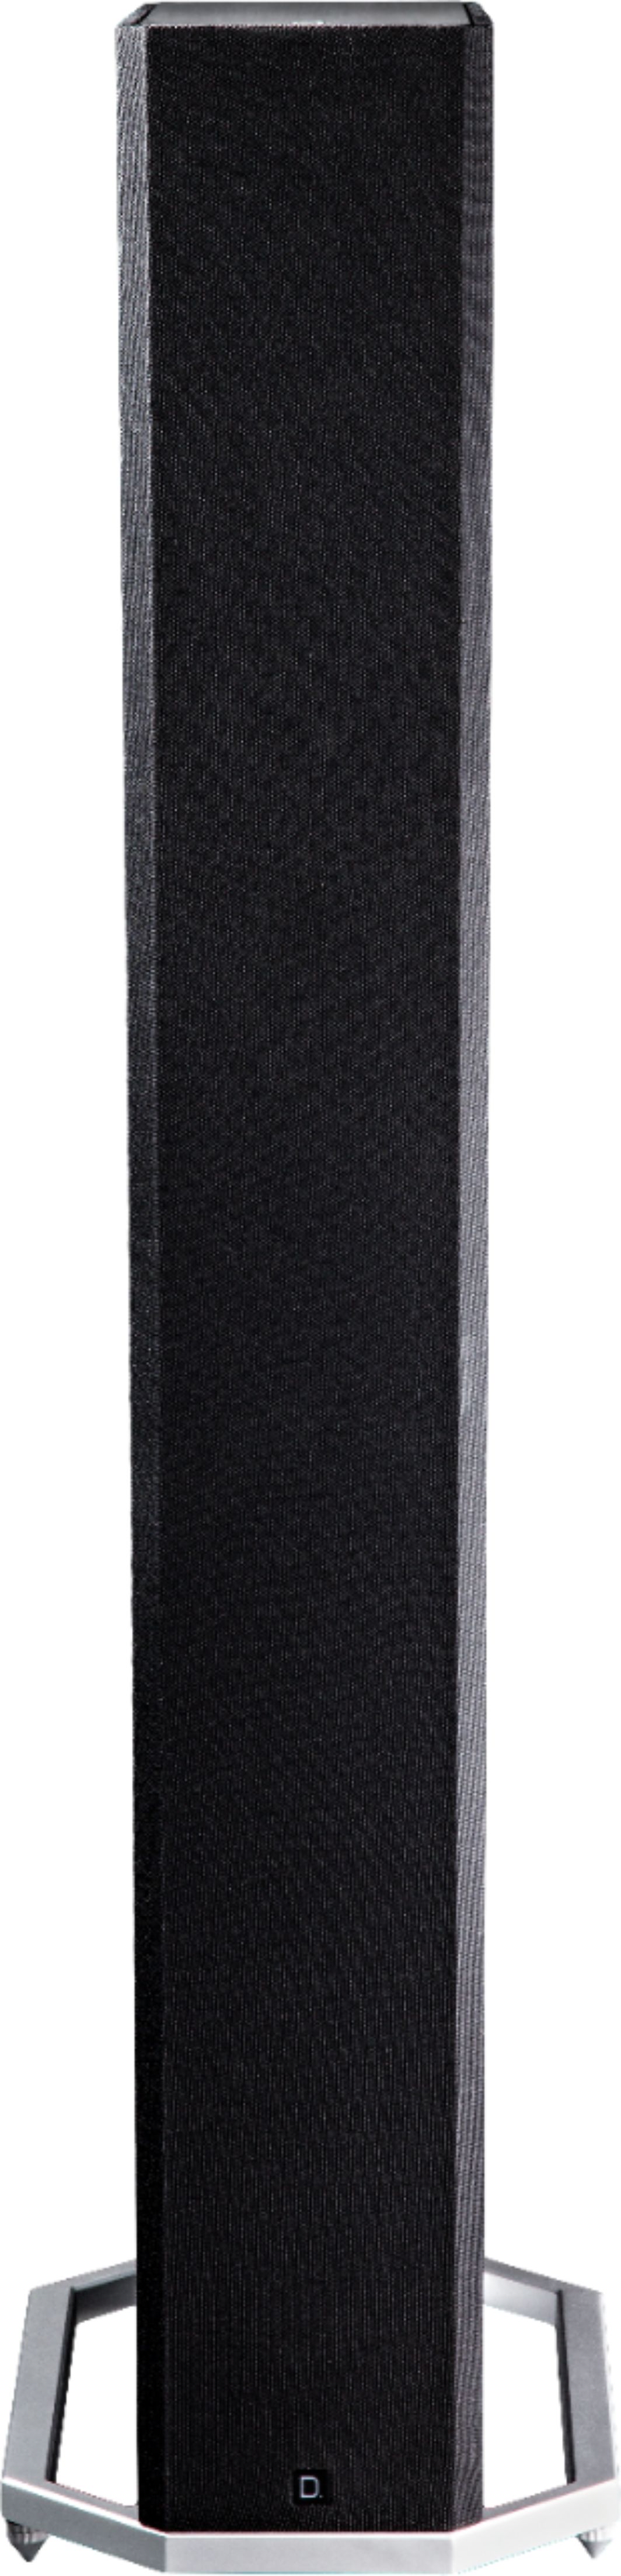 Definitive Technology - BP-9040 High Performance Home Theater Tower Speaker with Integrated 8” Powered Subwoofer - Black